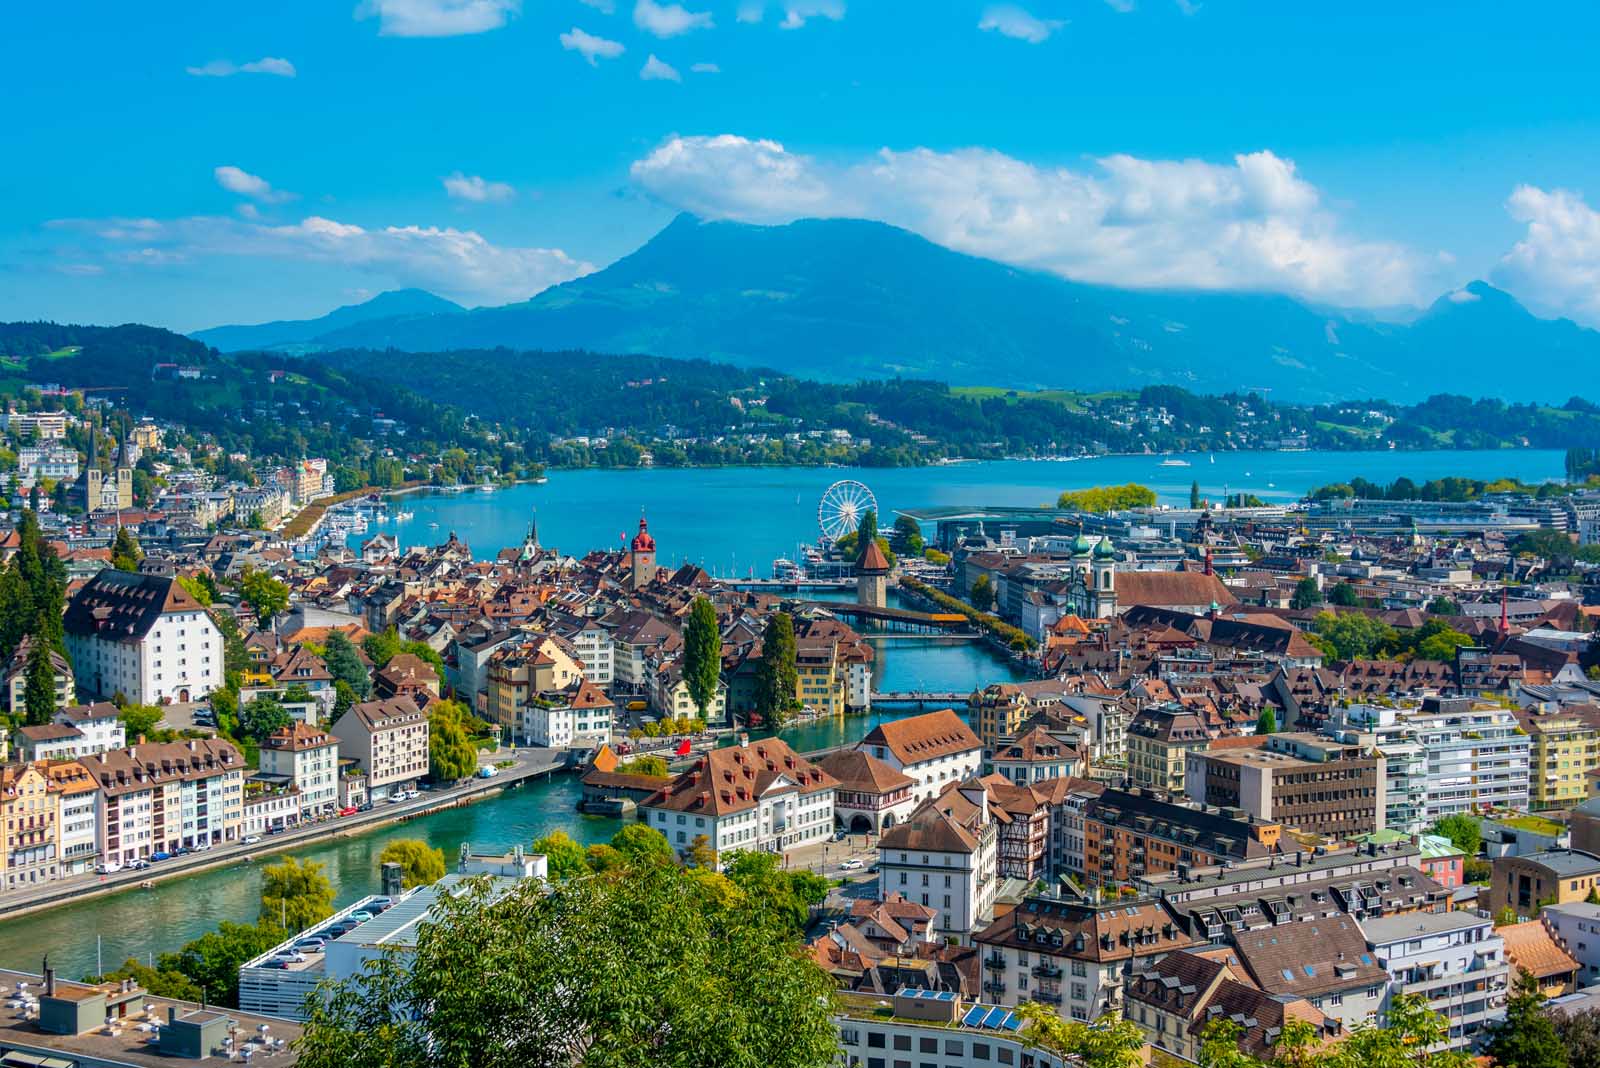 Things to do in Lucerne View from Guetsch palace of the 9 towers